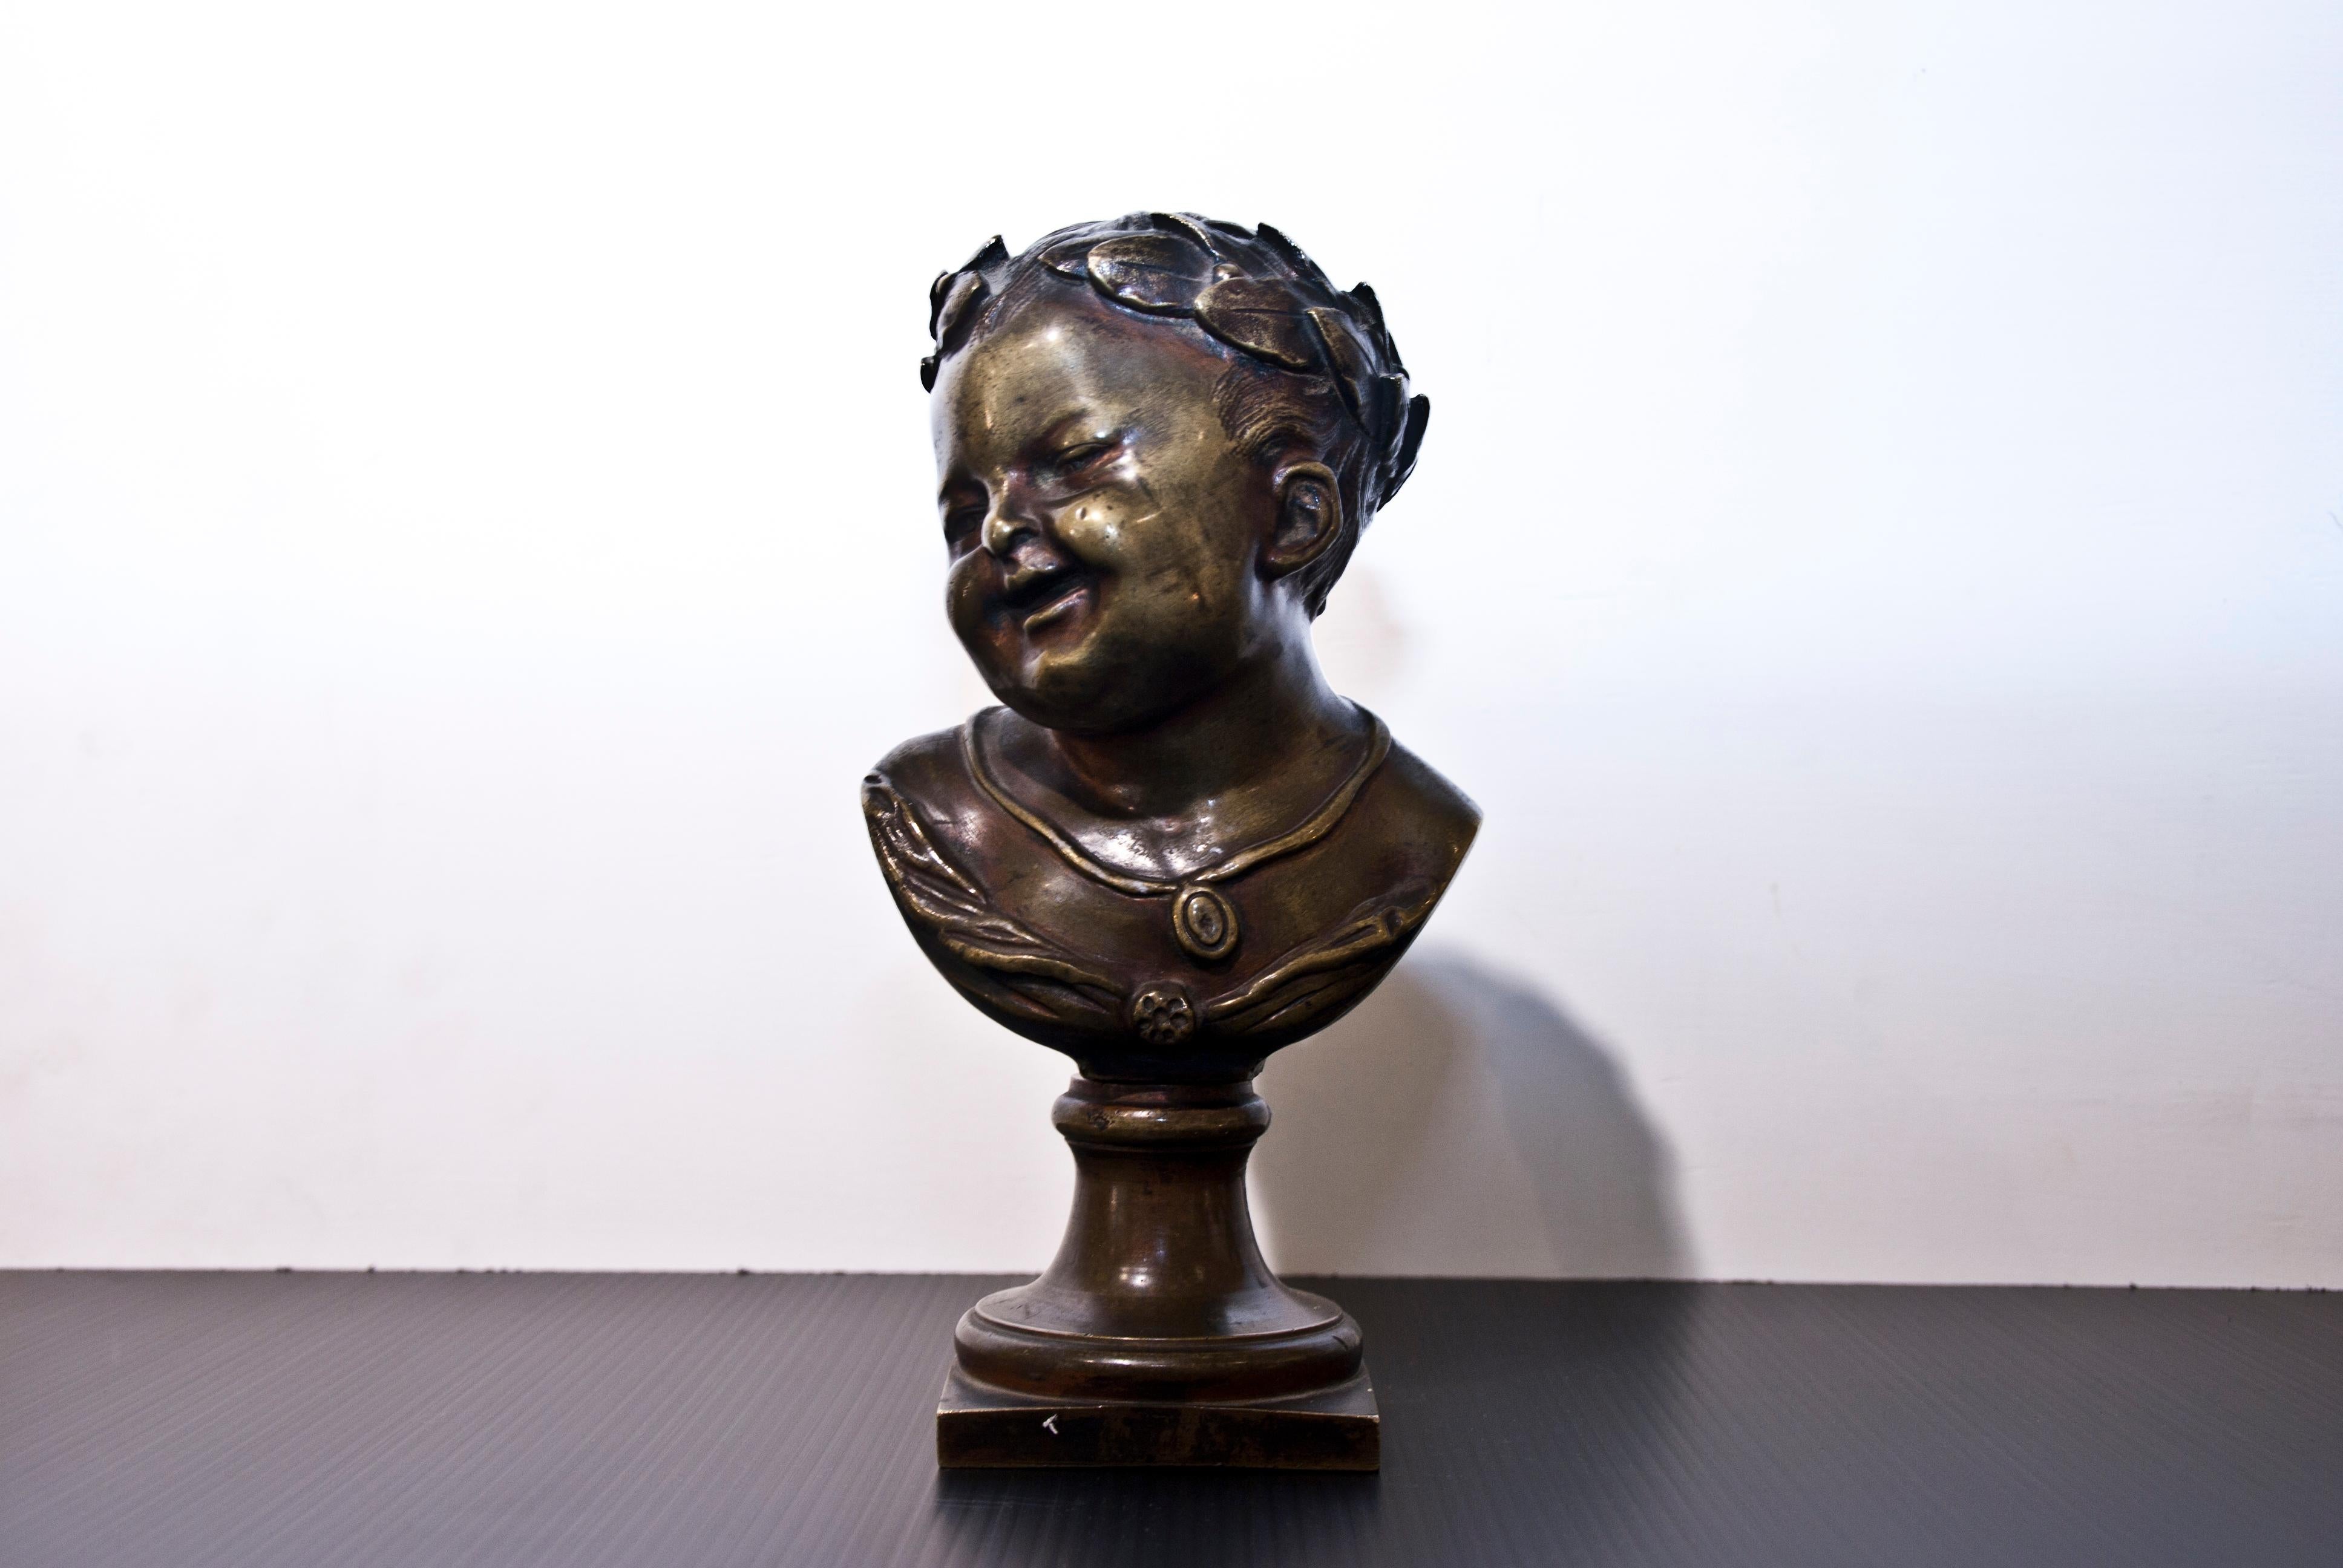 19th century bronze bust of young emperor. 

This object is shipped from Italy. Under existing legislation, any object in Italy created over 70 years ago by an artist who has died requires a licence for export regardless of the work’s market price.